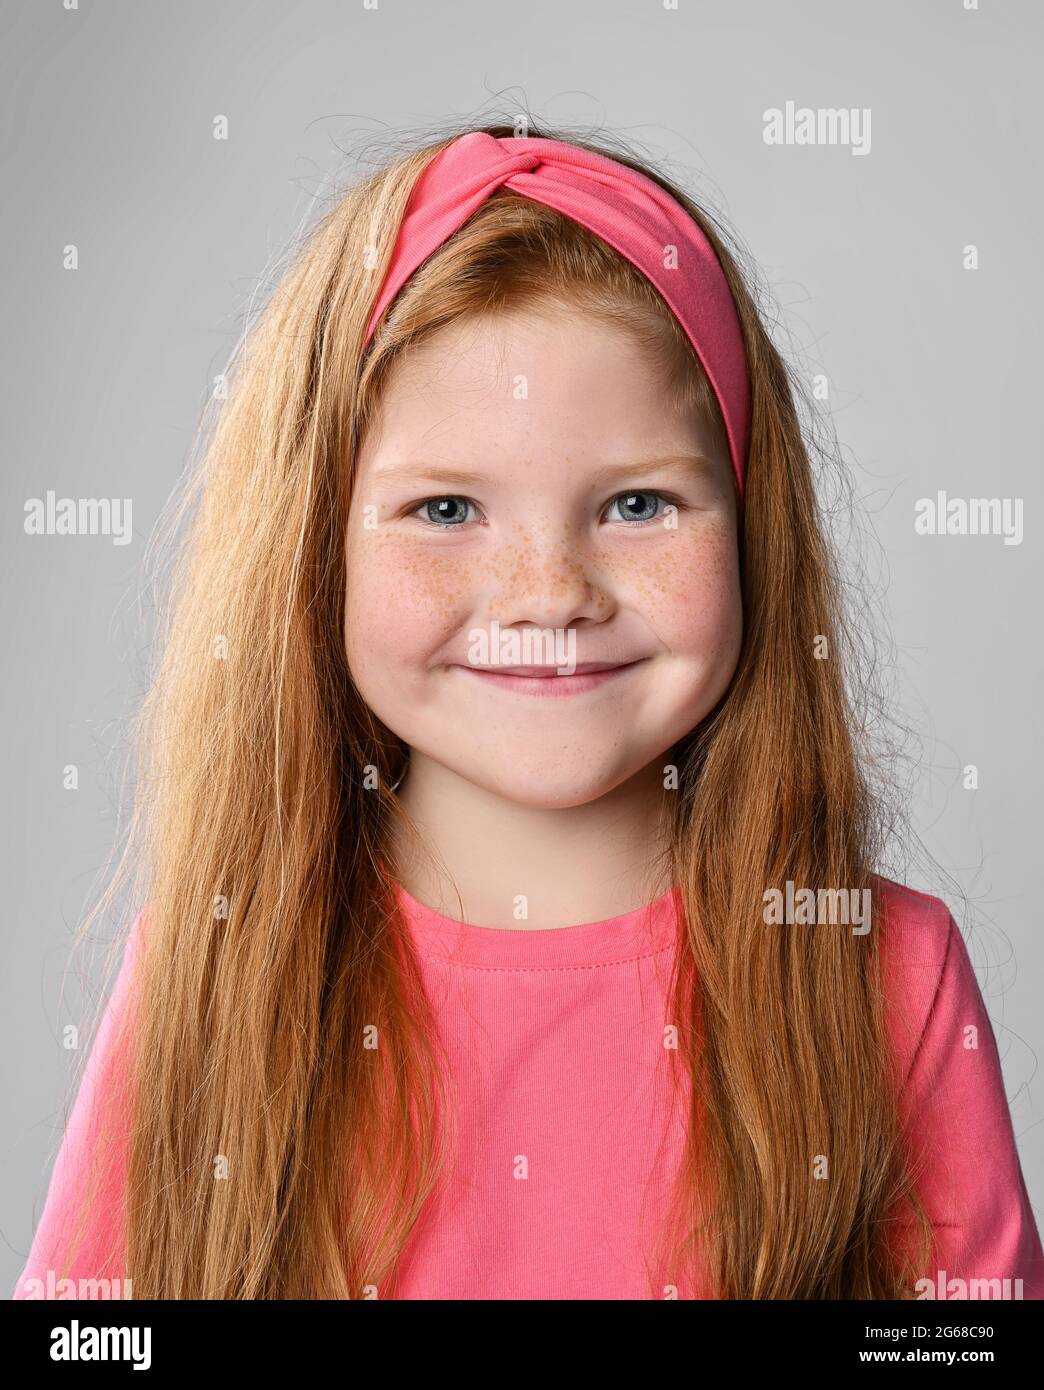 Portrait of happy smiling redhead kid girl with freckles on face in pink t-shirt and headband Stock Photo